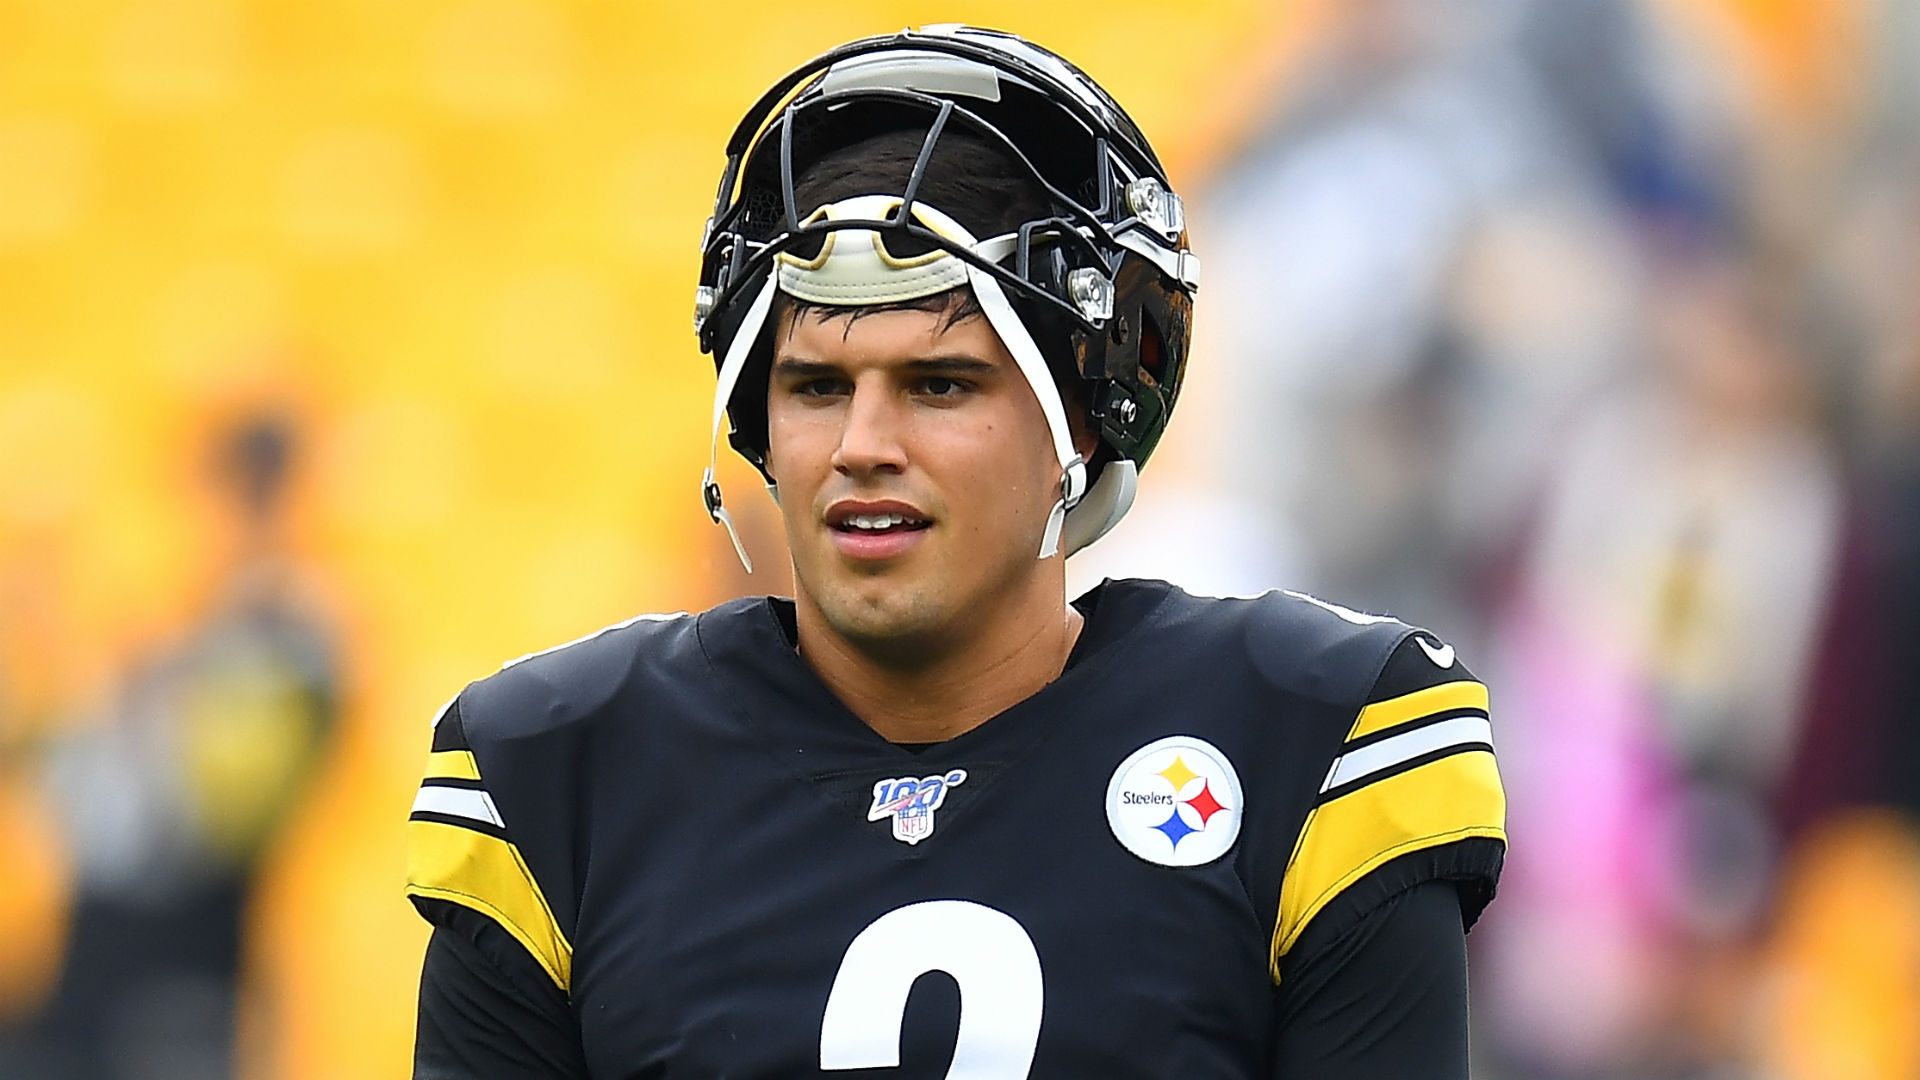 Mason Rudolph injury update Steelers QB (concussion) returns to